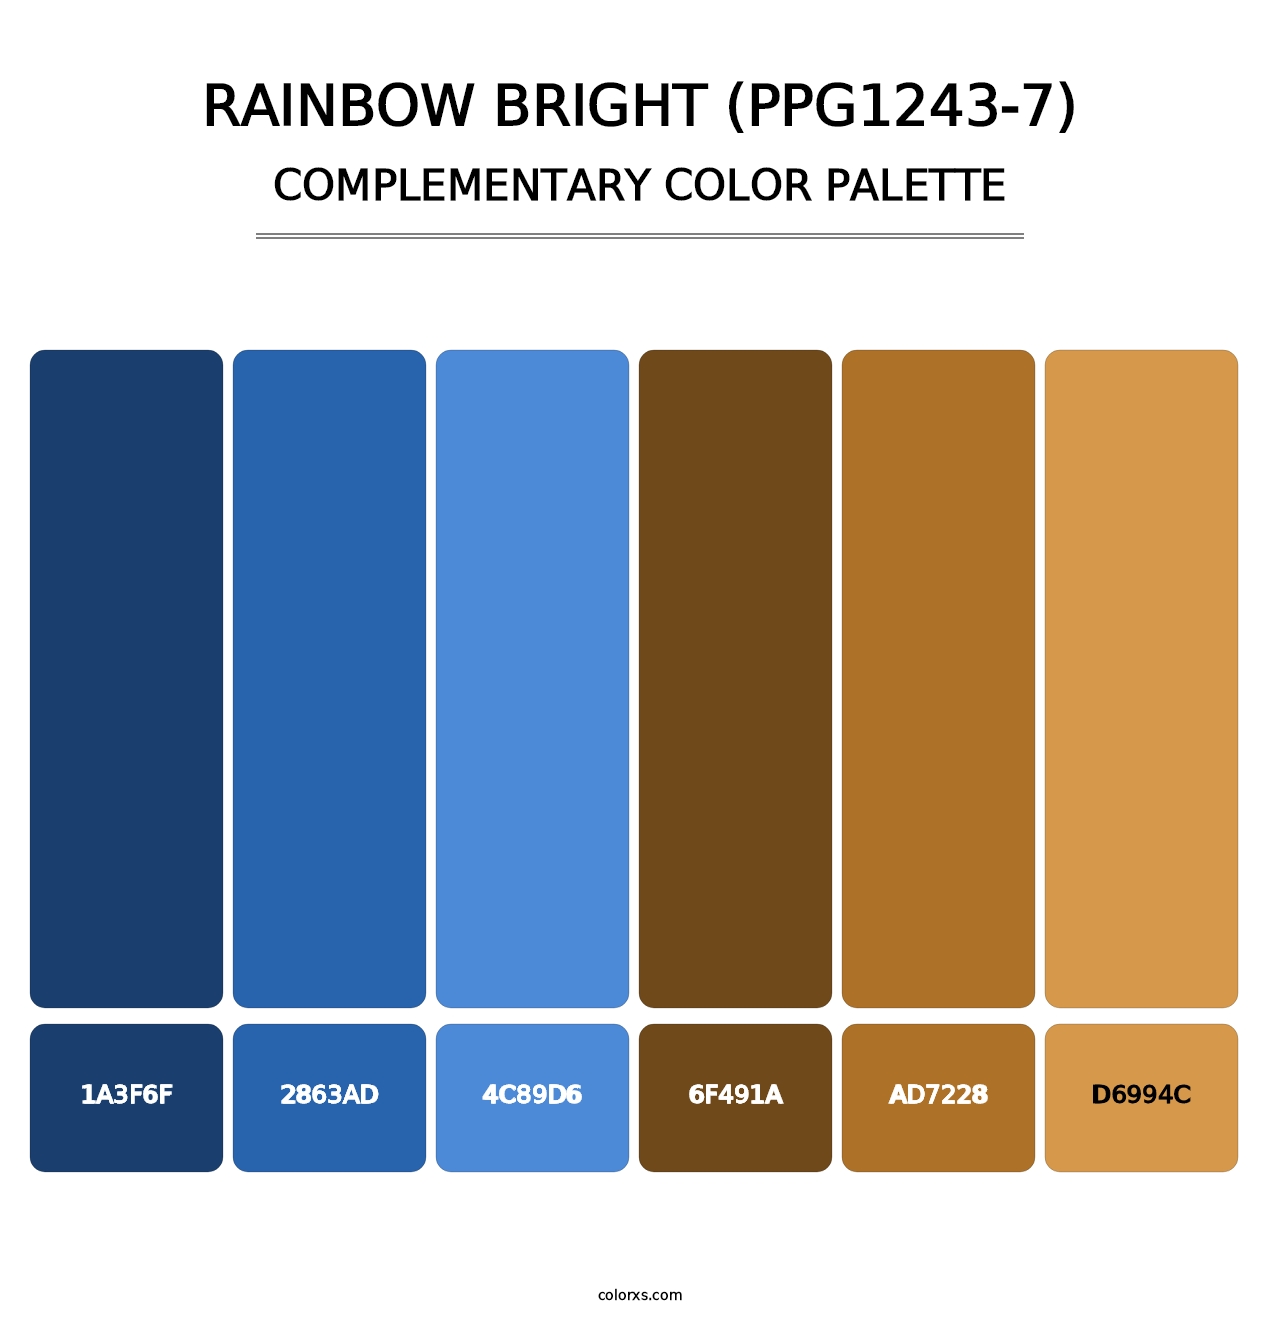 Rainbow Bright (PPG1243-7) - Complementary Color Palette